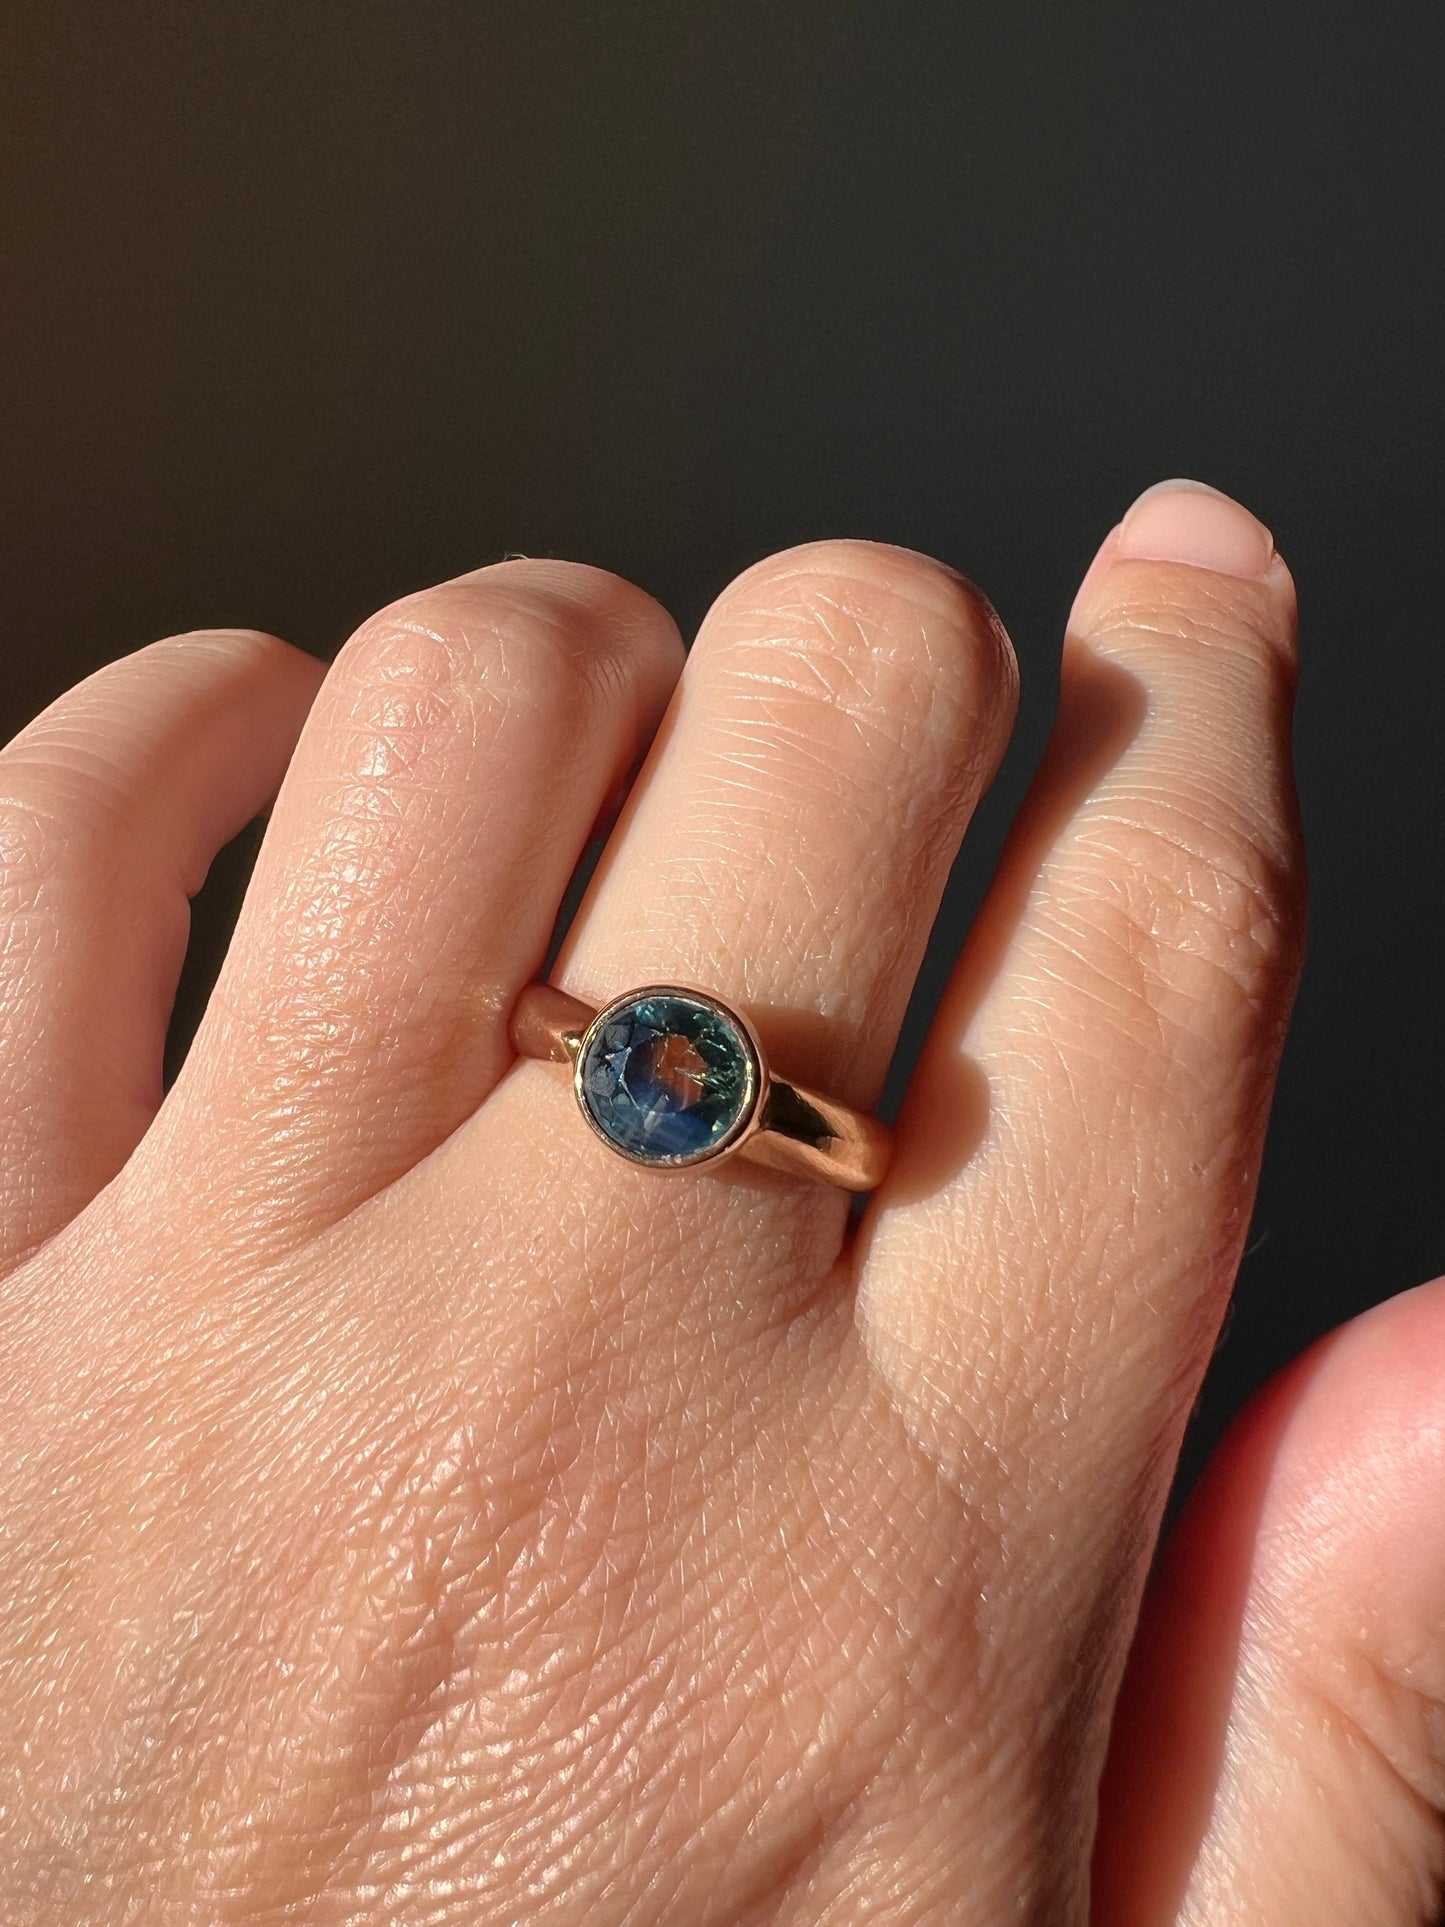 The 50/50 GREEN Half BLUE Natural Old Cut Sapphire Ring Victorian Antique 15k Rose Gold Ring Solitaire Alt Engagement Bi Color Gift OMC 14k